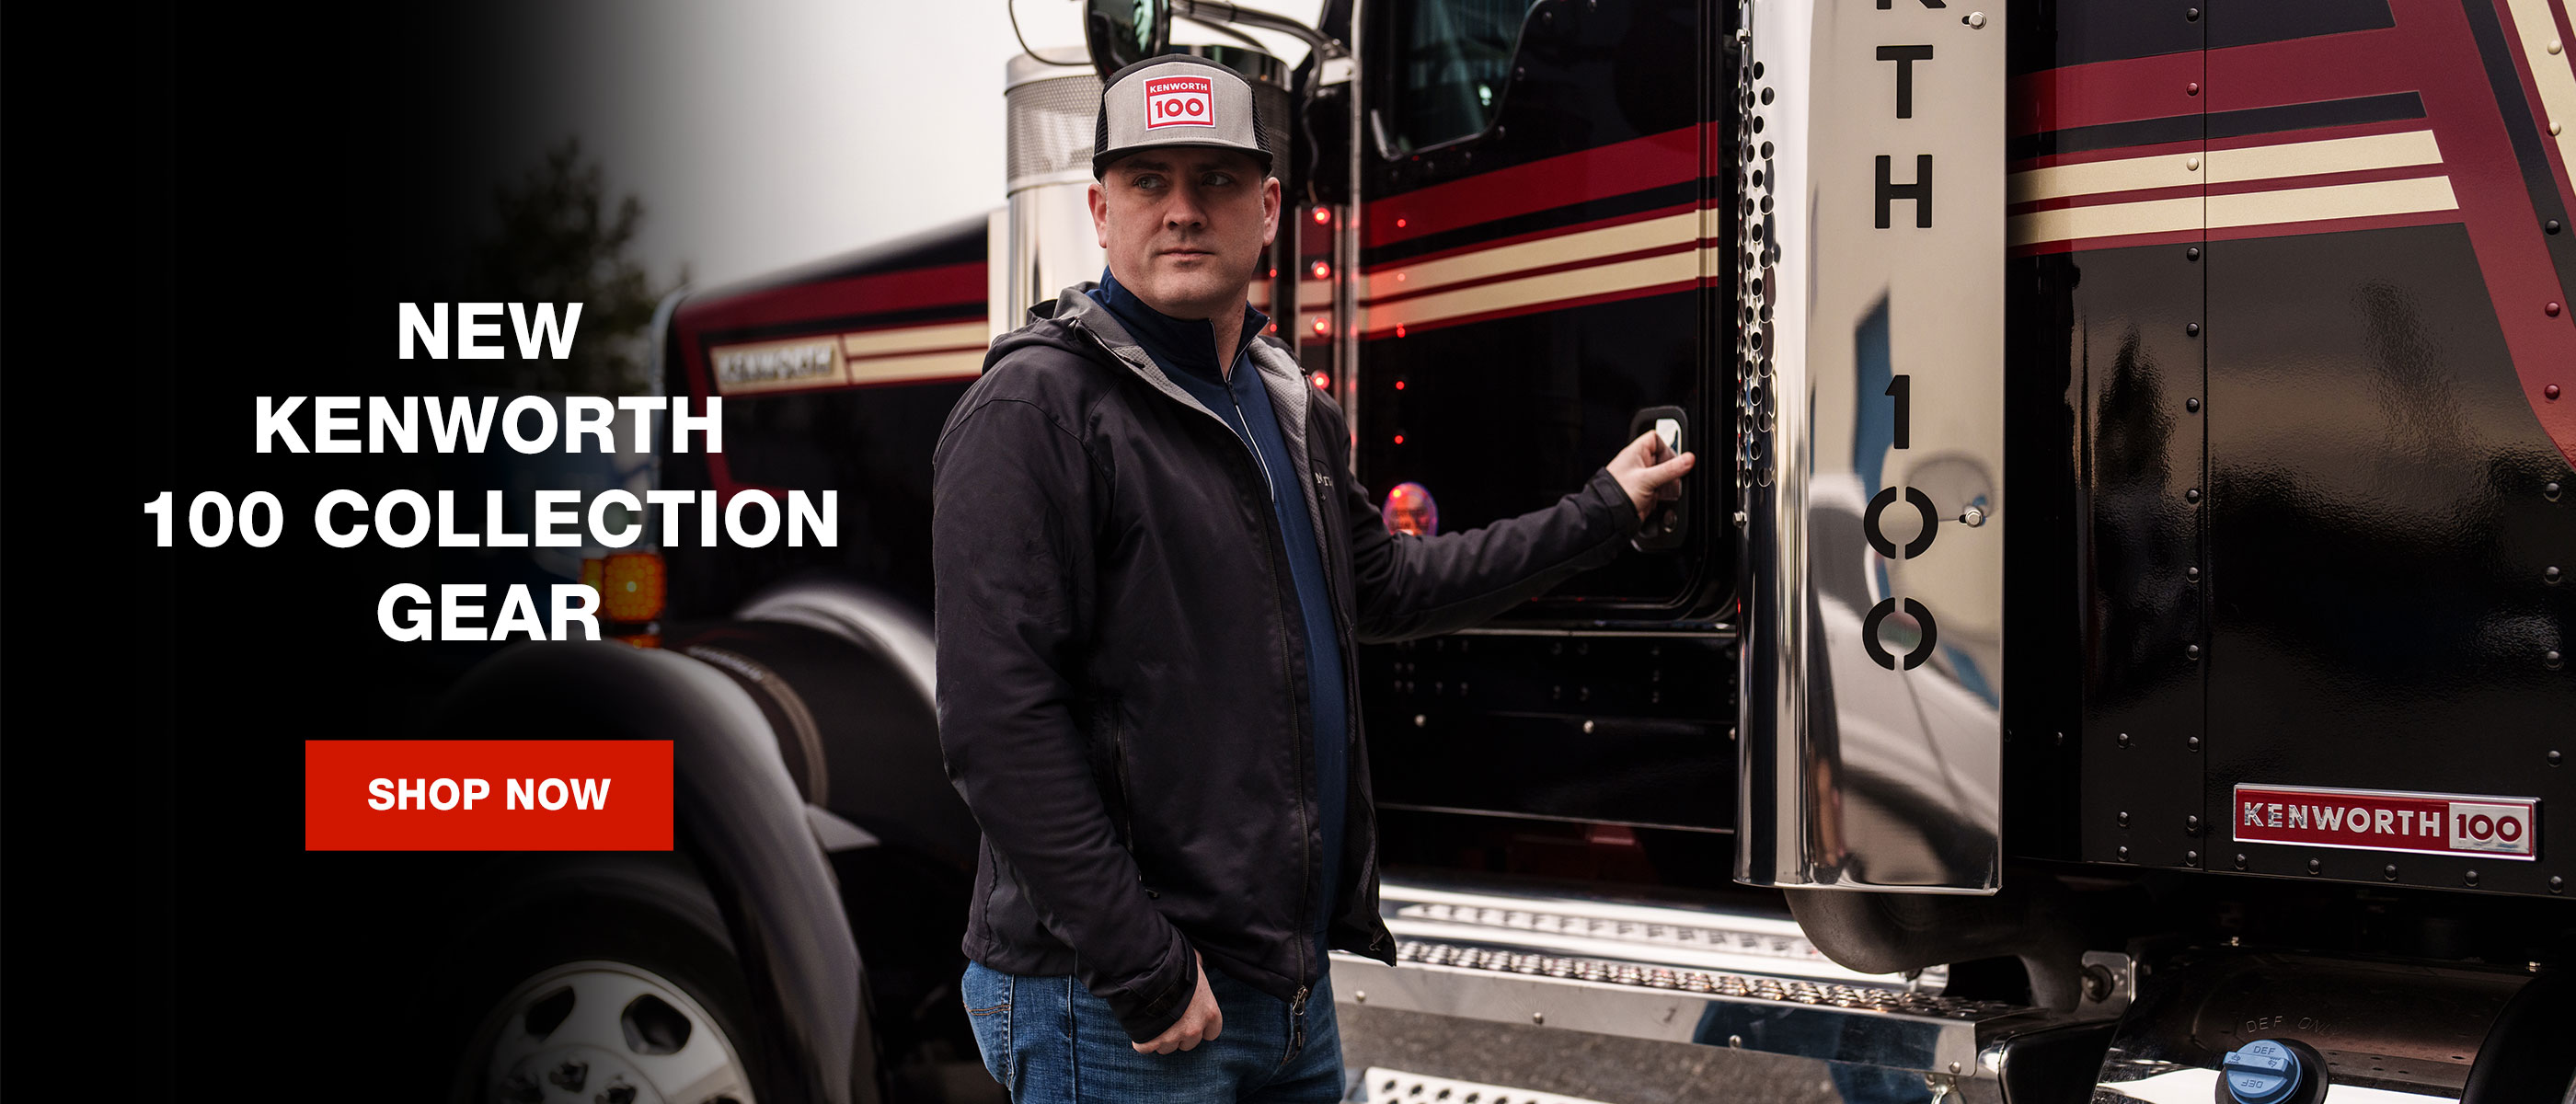  New Kenworth 100 Collection Gear 